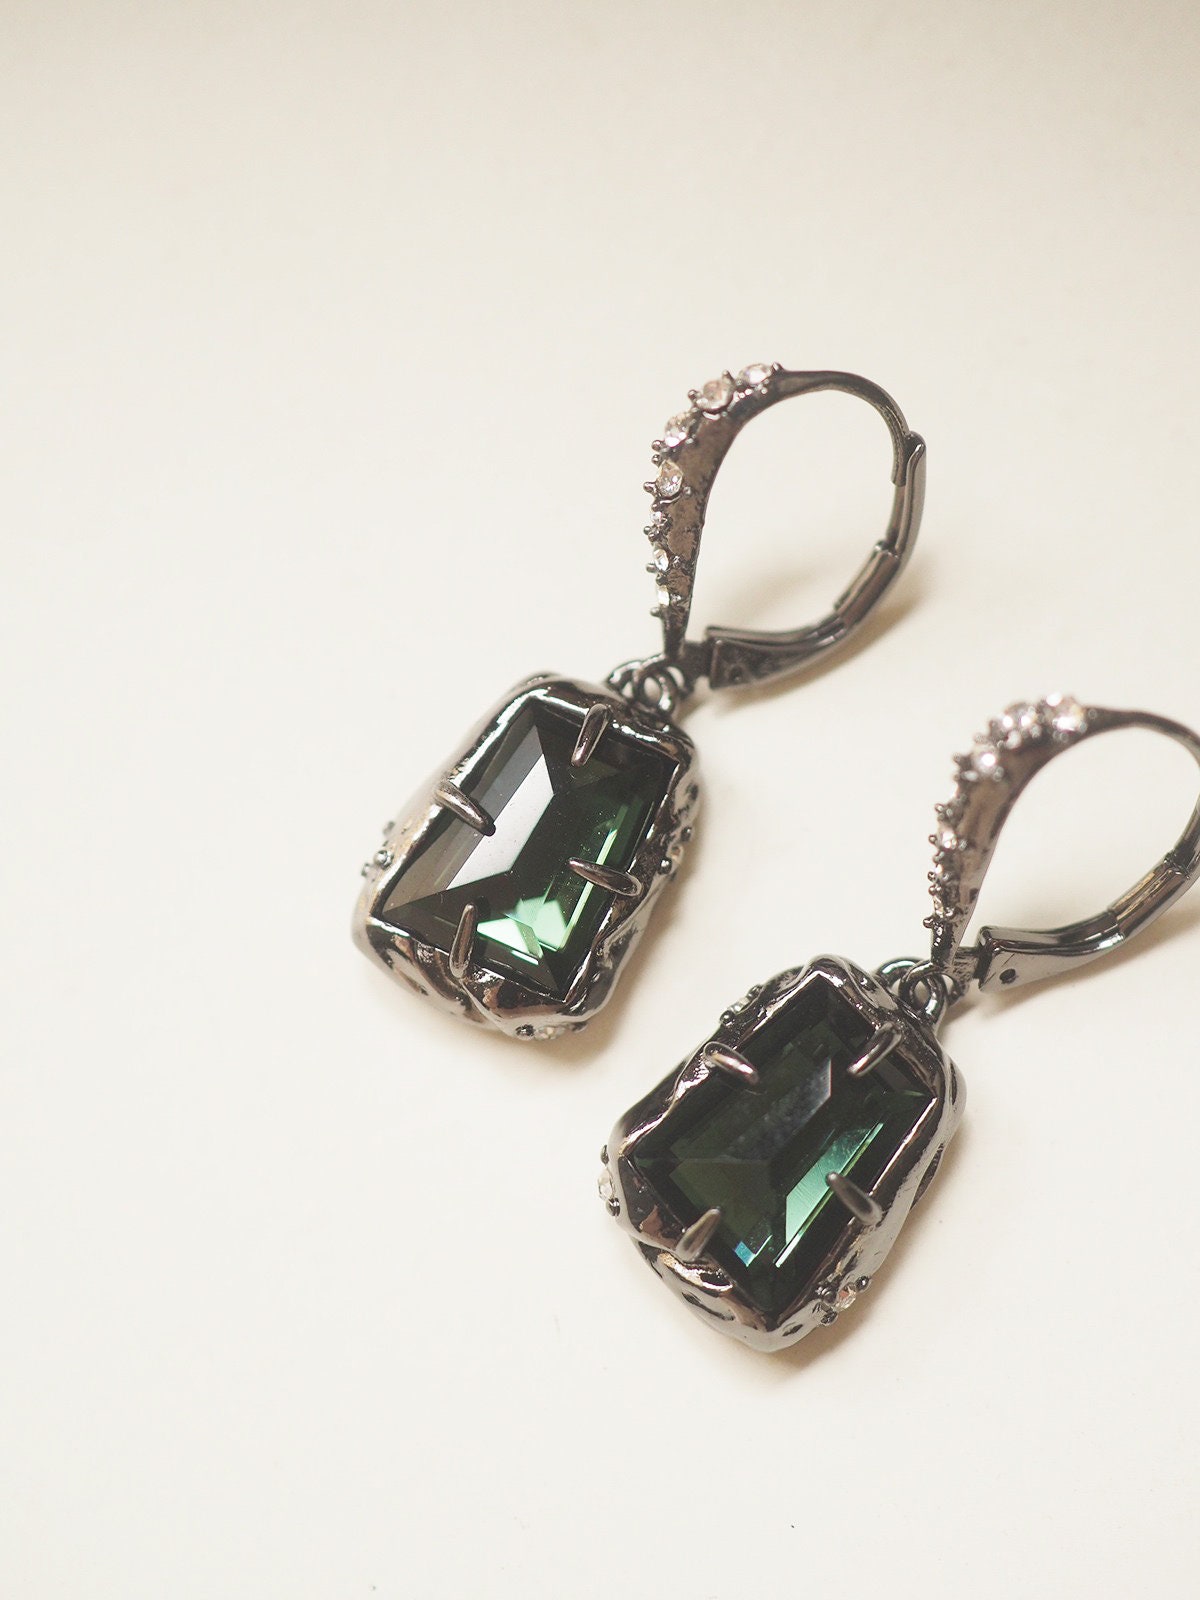 ALEXIS BITTAR VINTAGE 100% Authentic Genuine, Geometric Natural Stones Earrings in Green with Dark Metal Colour, 1990's